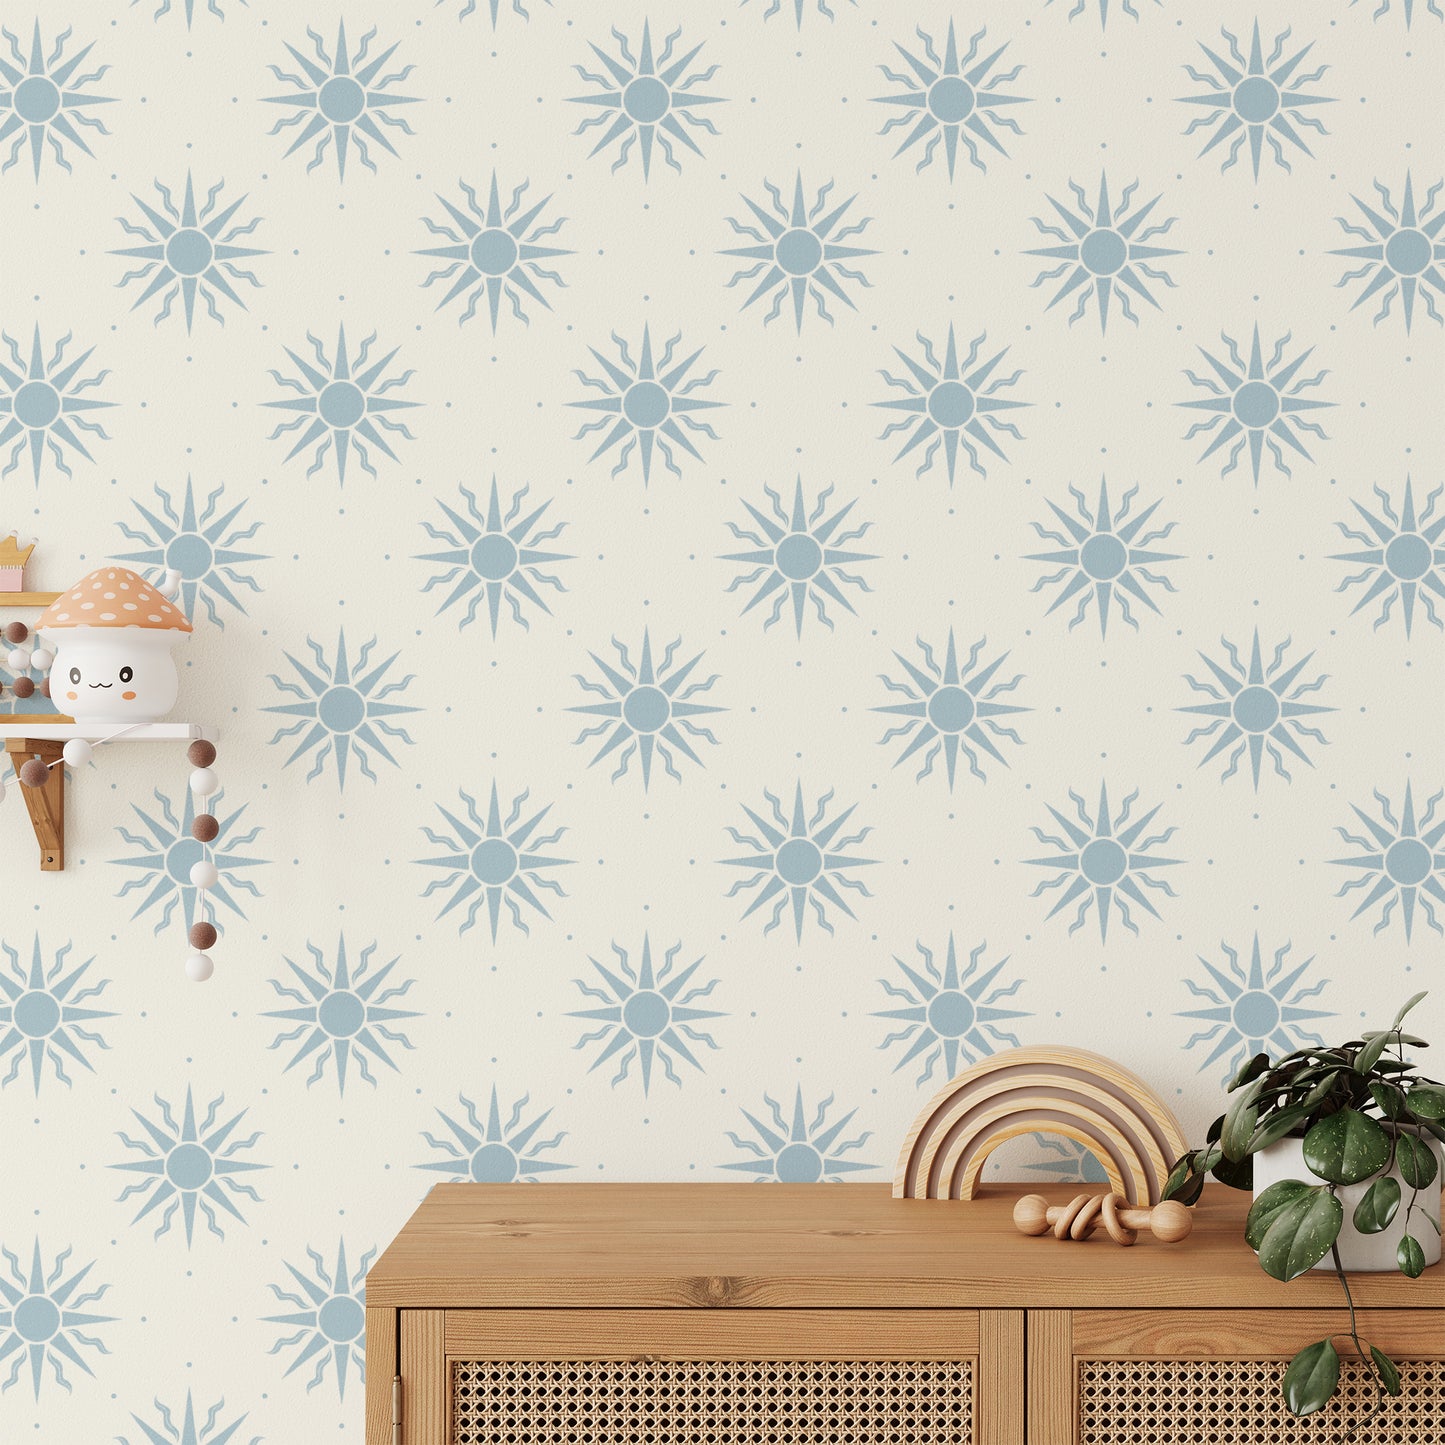 Sunny Suns Wallpaper in Blue shown in a kids bedroom.